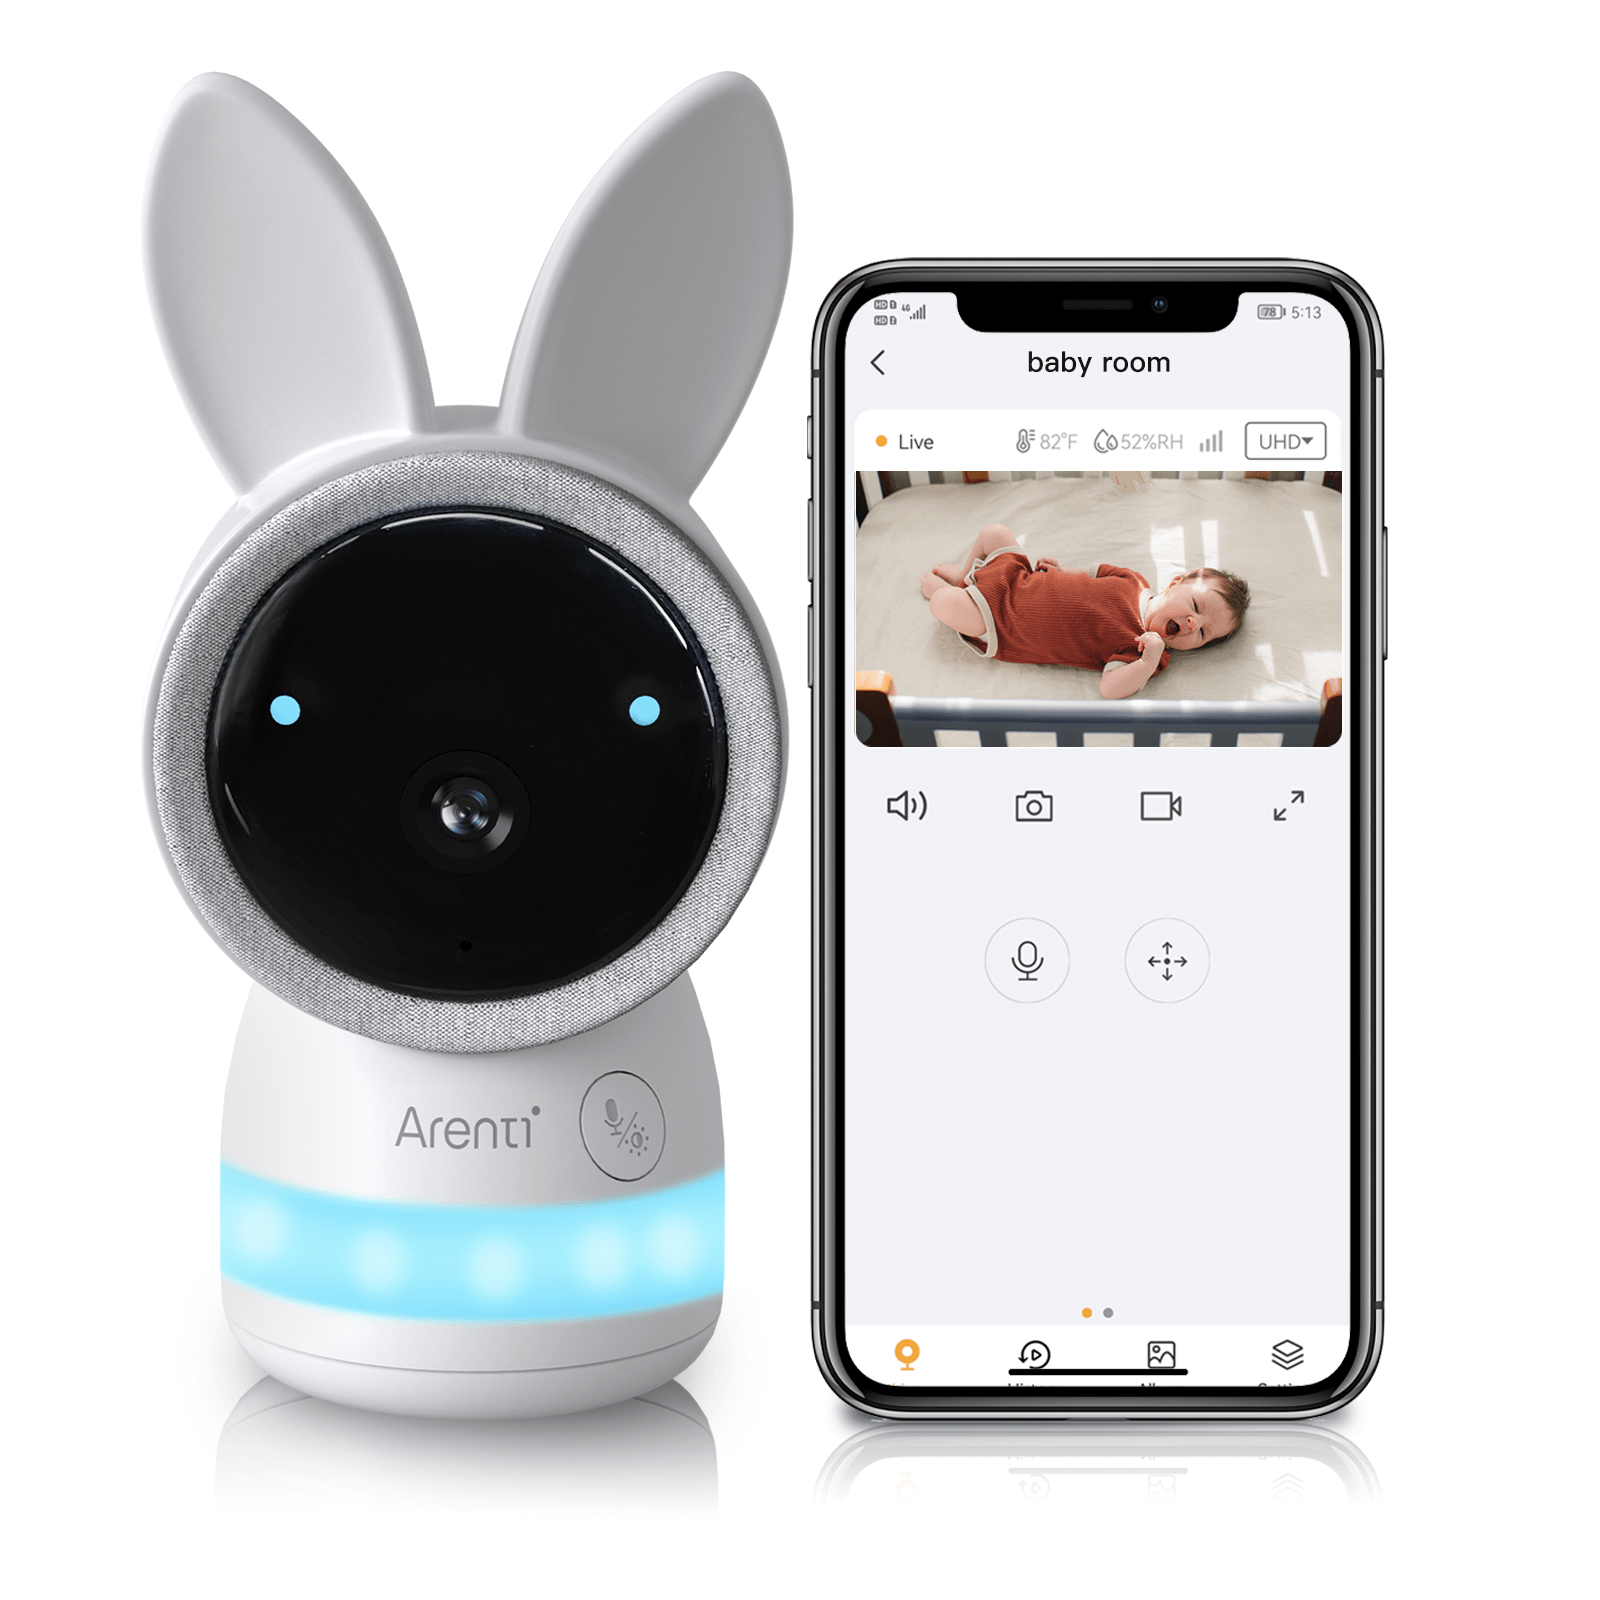 Arenti AInanny 2K UHD Video Pan-Tilt Baby Monitor (Only Camera)